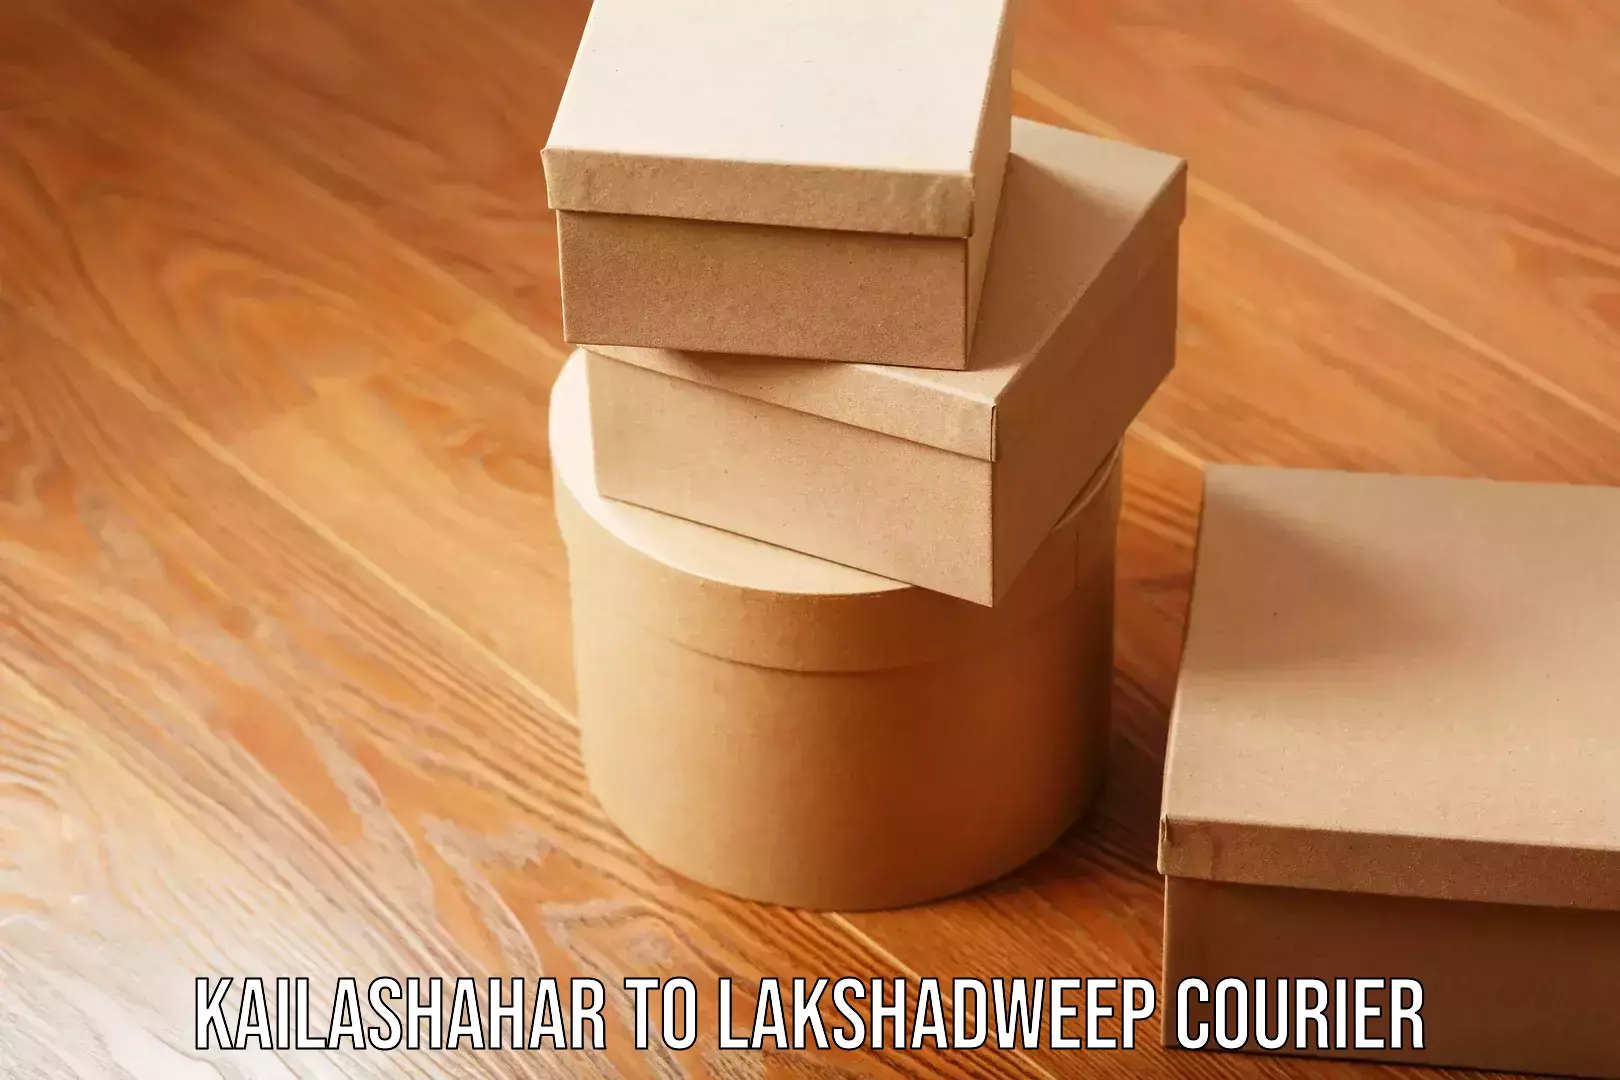 User-friendly courier app Kailashahar to Lakshadweep